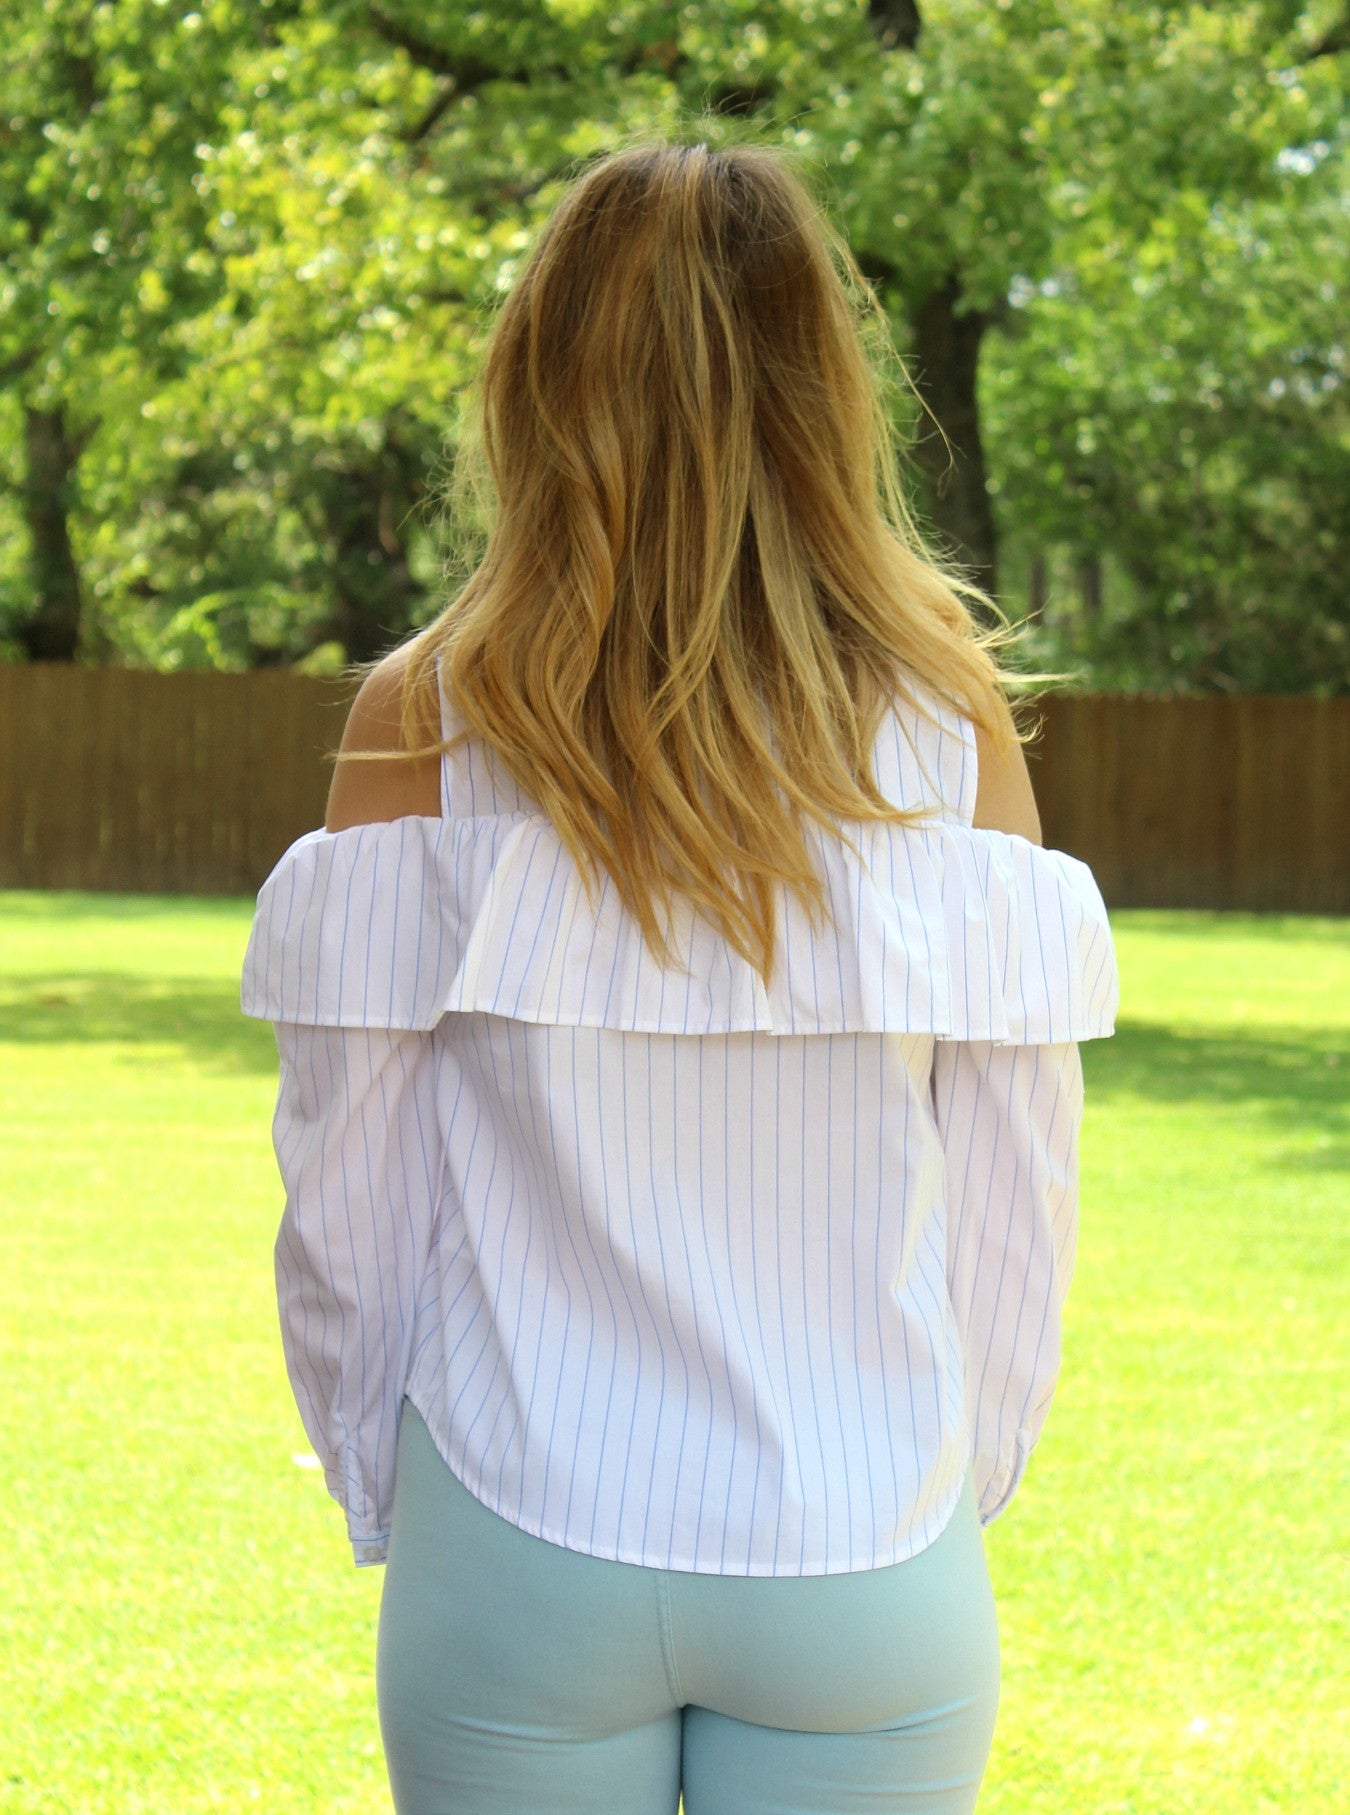 Chic Chick Stripe Open Shoulder Ruffle Top in White - Giddy Up Glamour Boutique